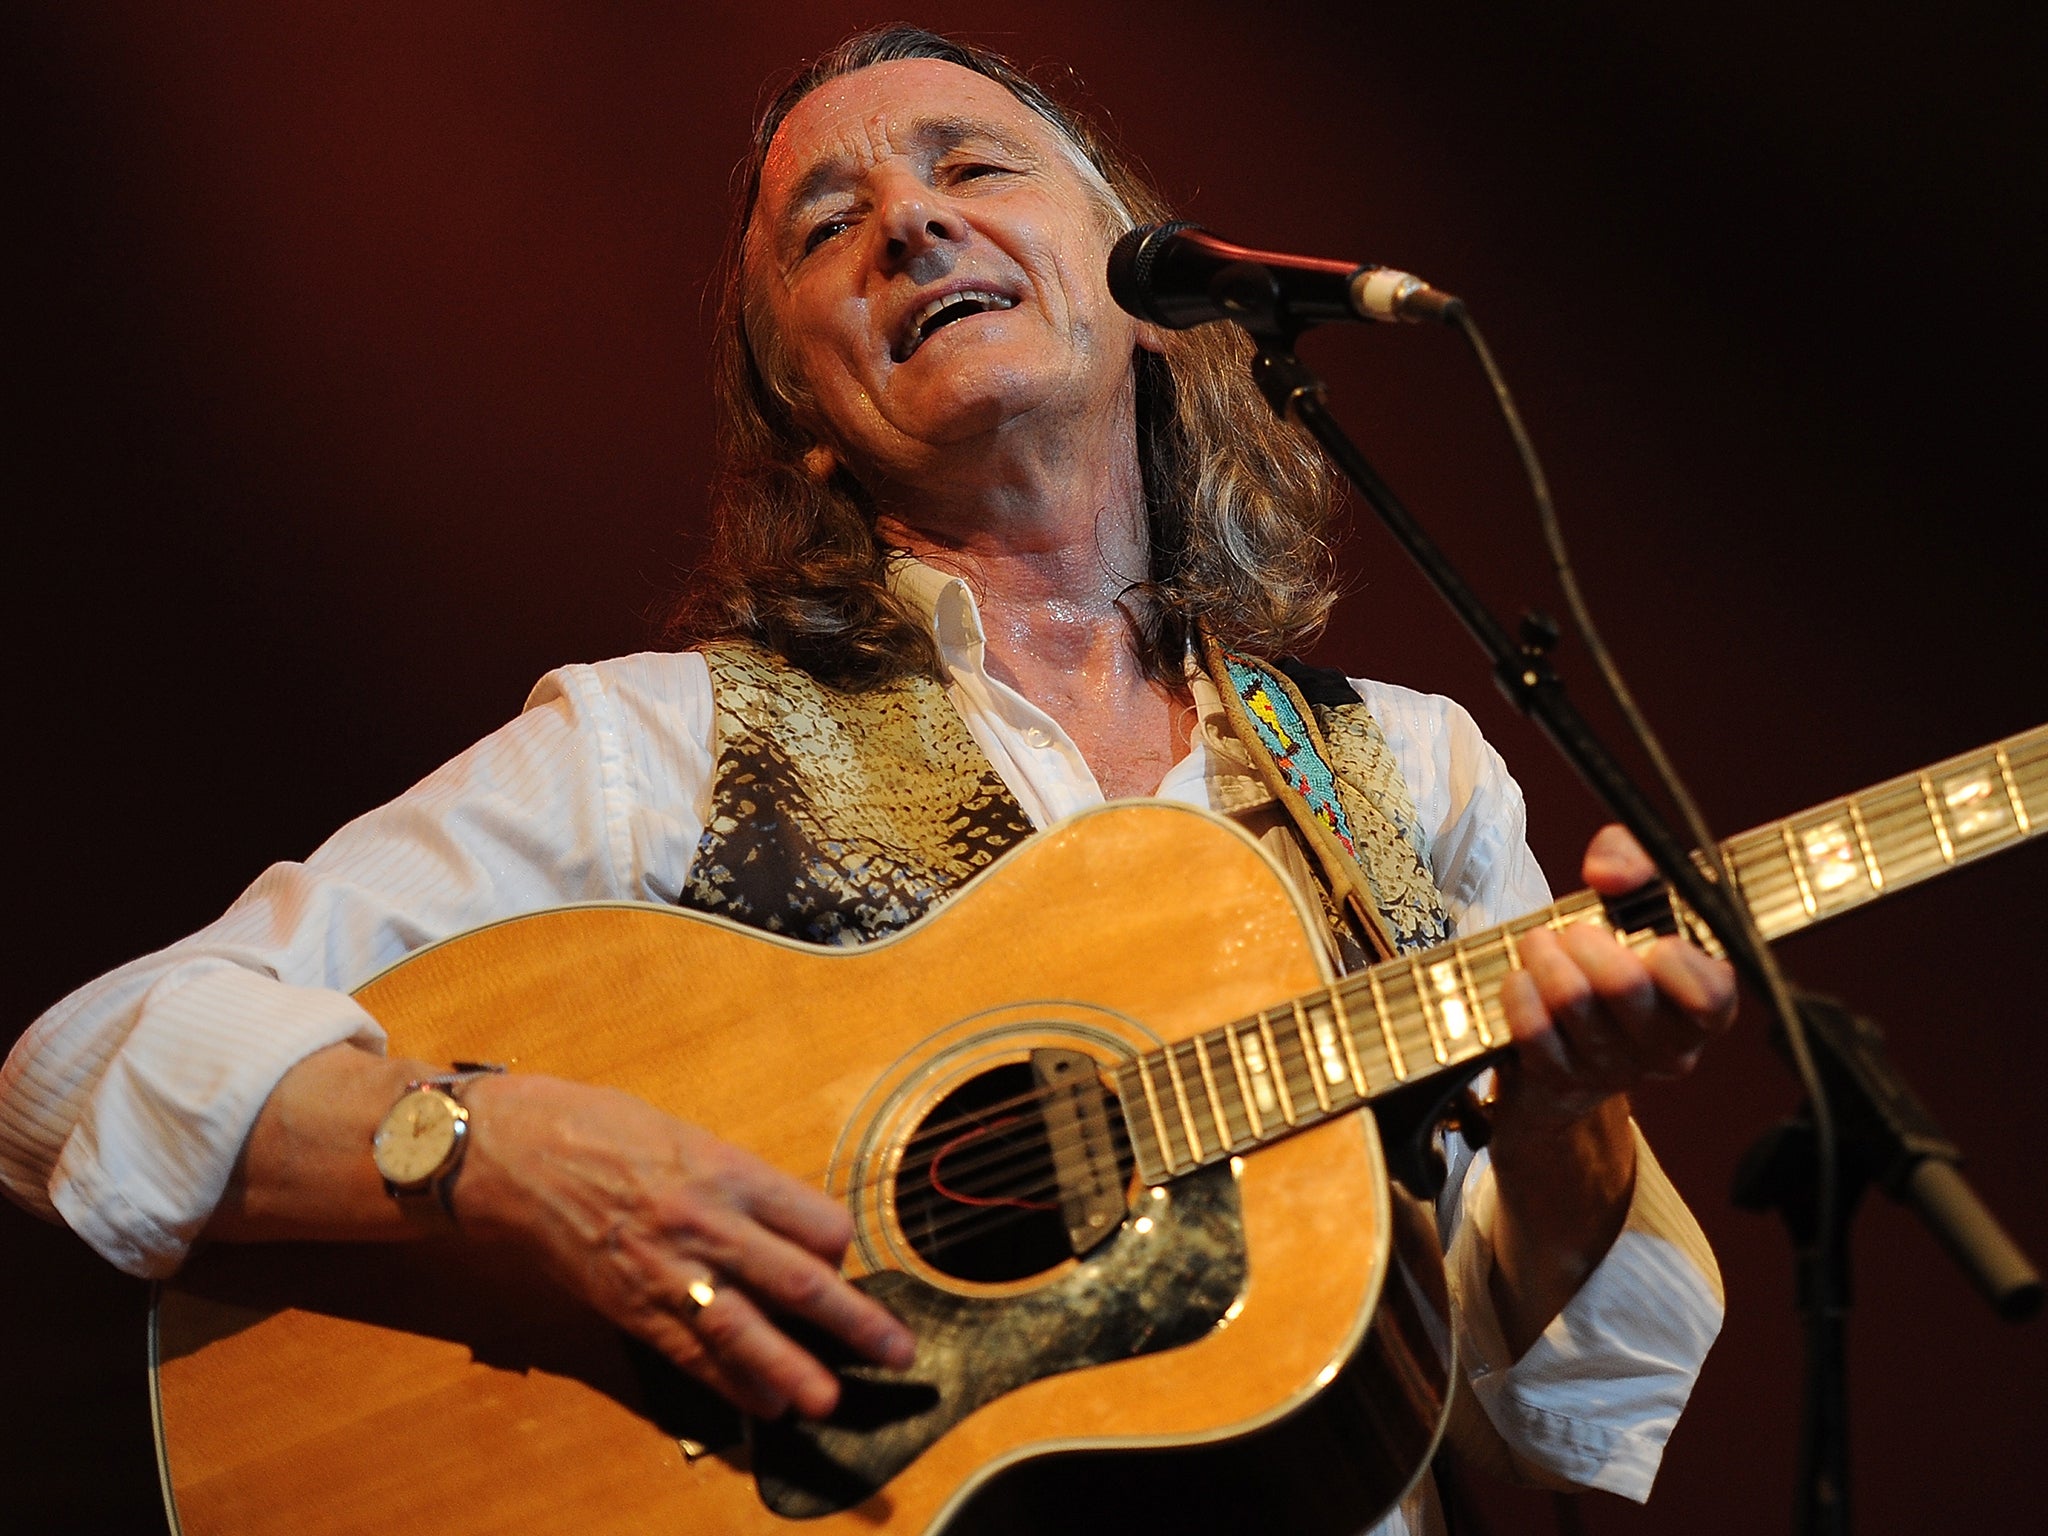 Roger Hodgson performing on stage at Bluesfest 2013 in Byron Bay, Australia